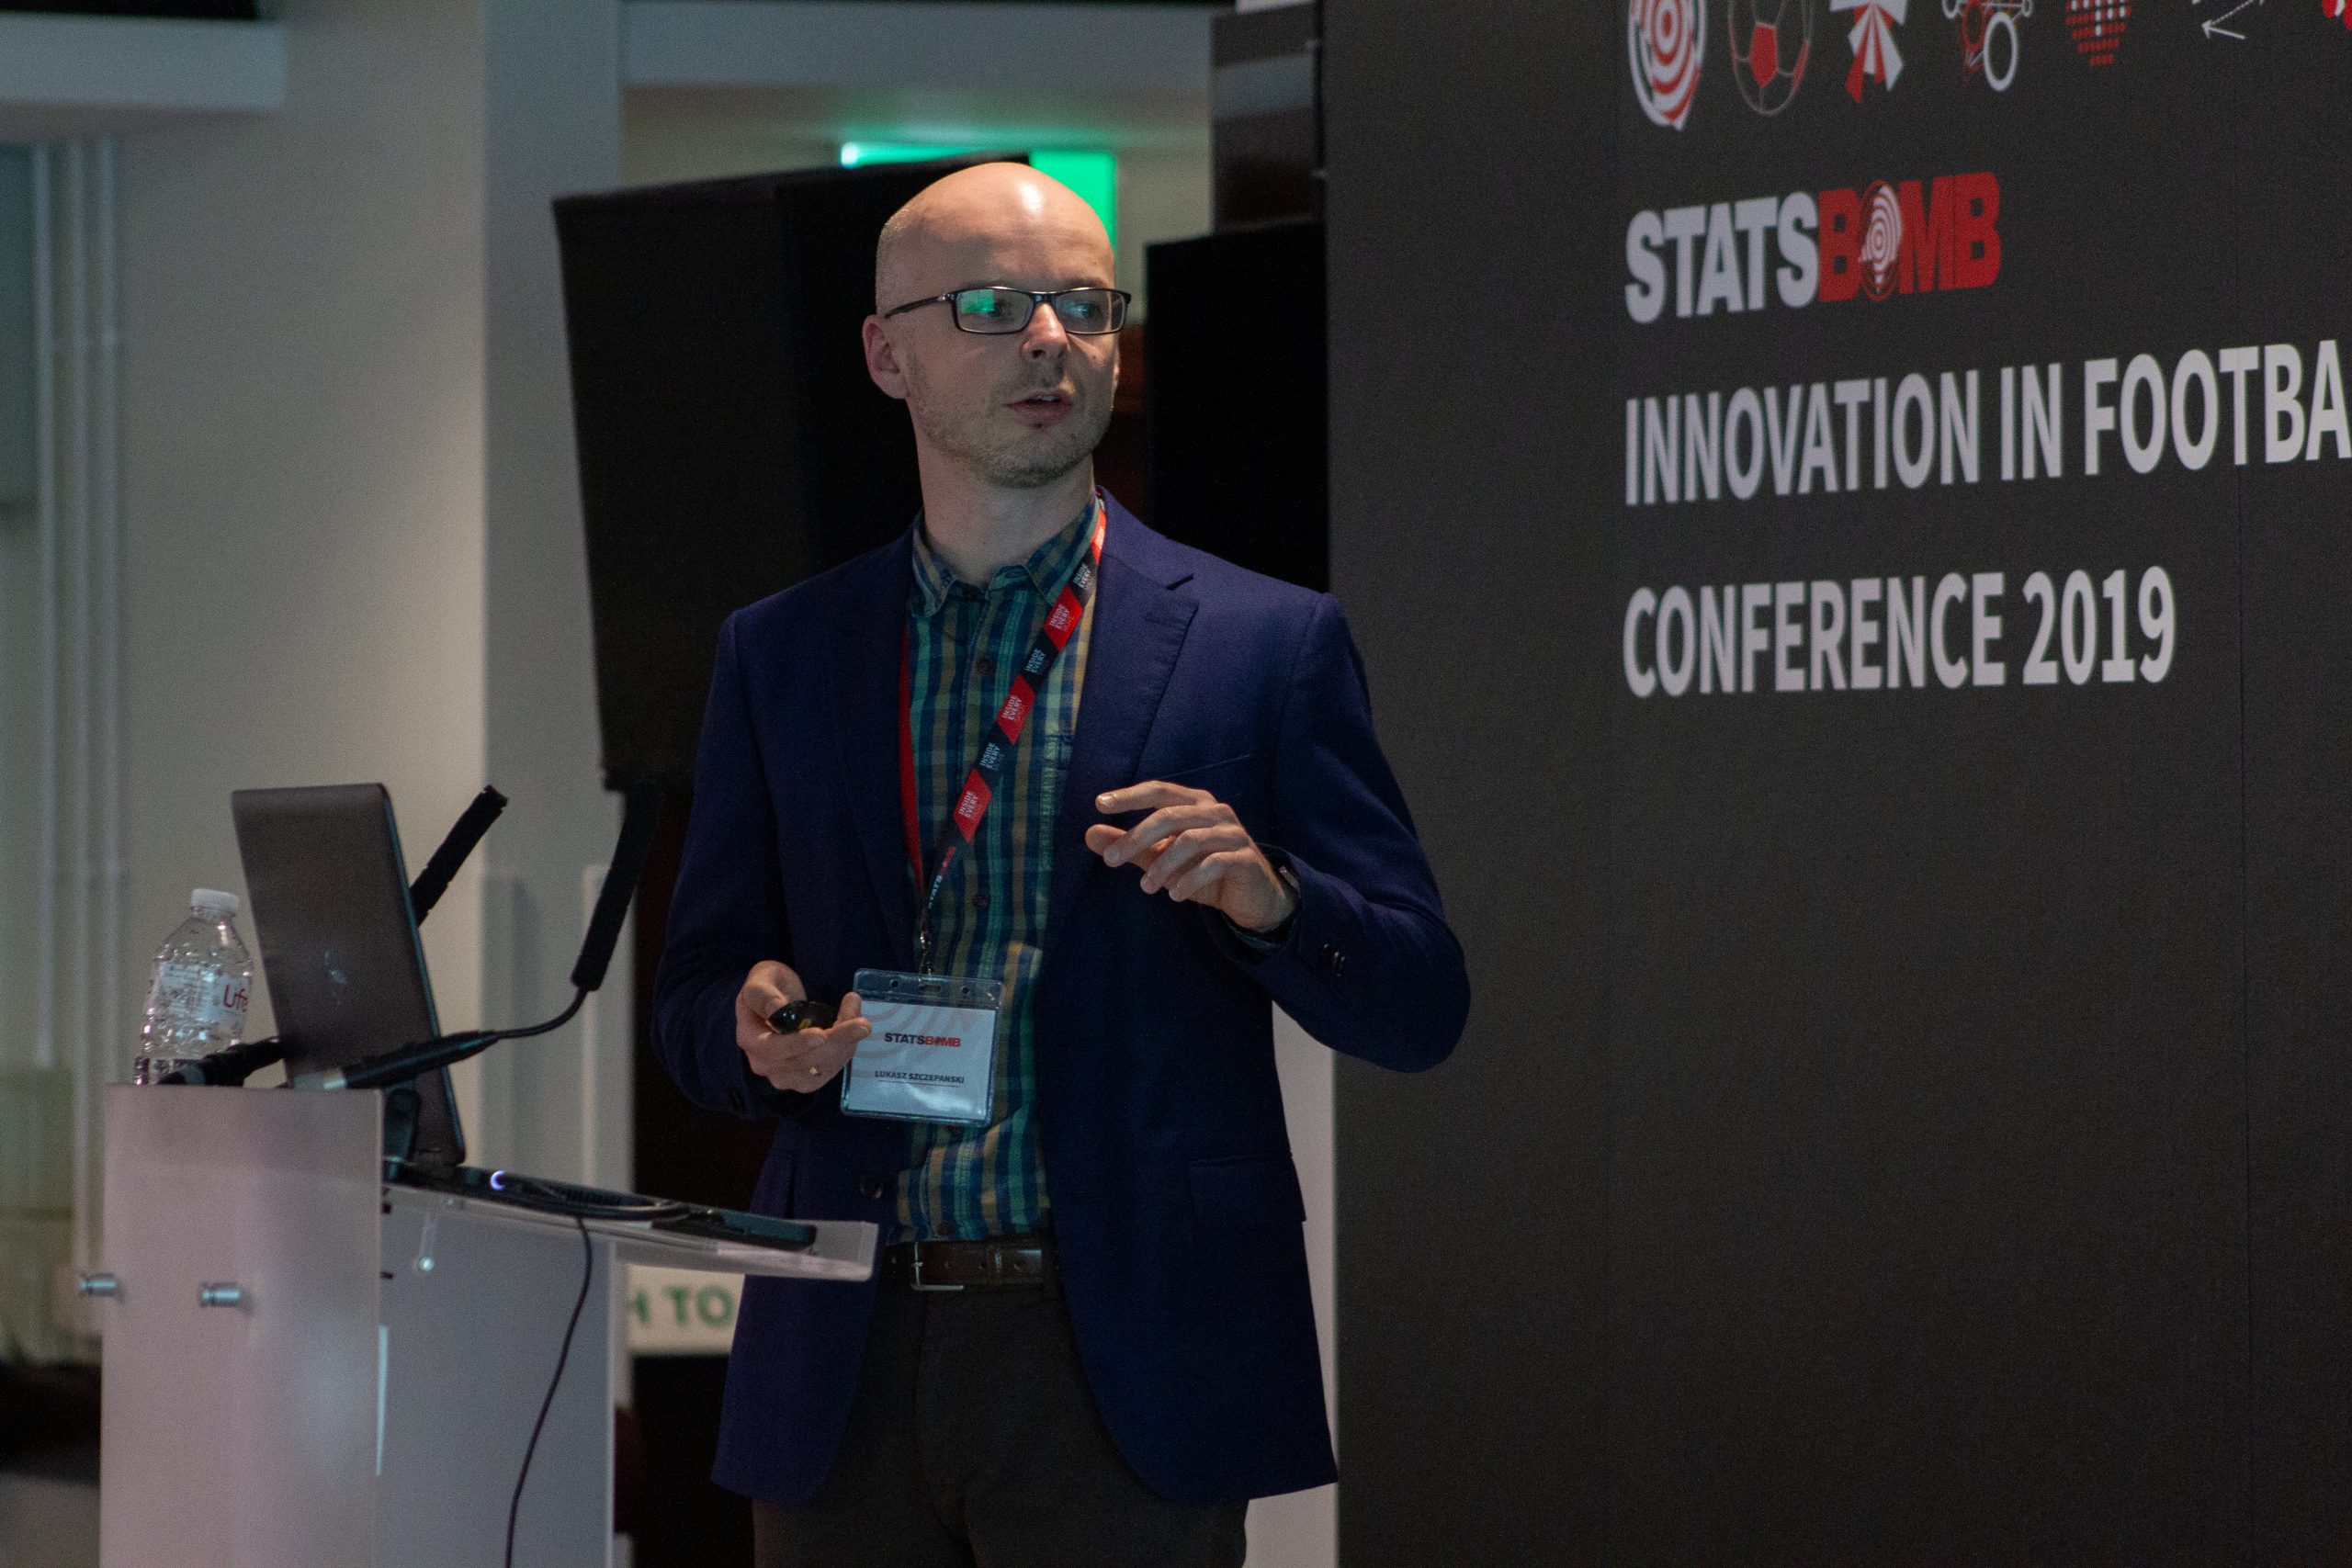 StatsBomb Conference Videos: How to Kick and Save, and Estimating the xG Impact of Actions